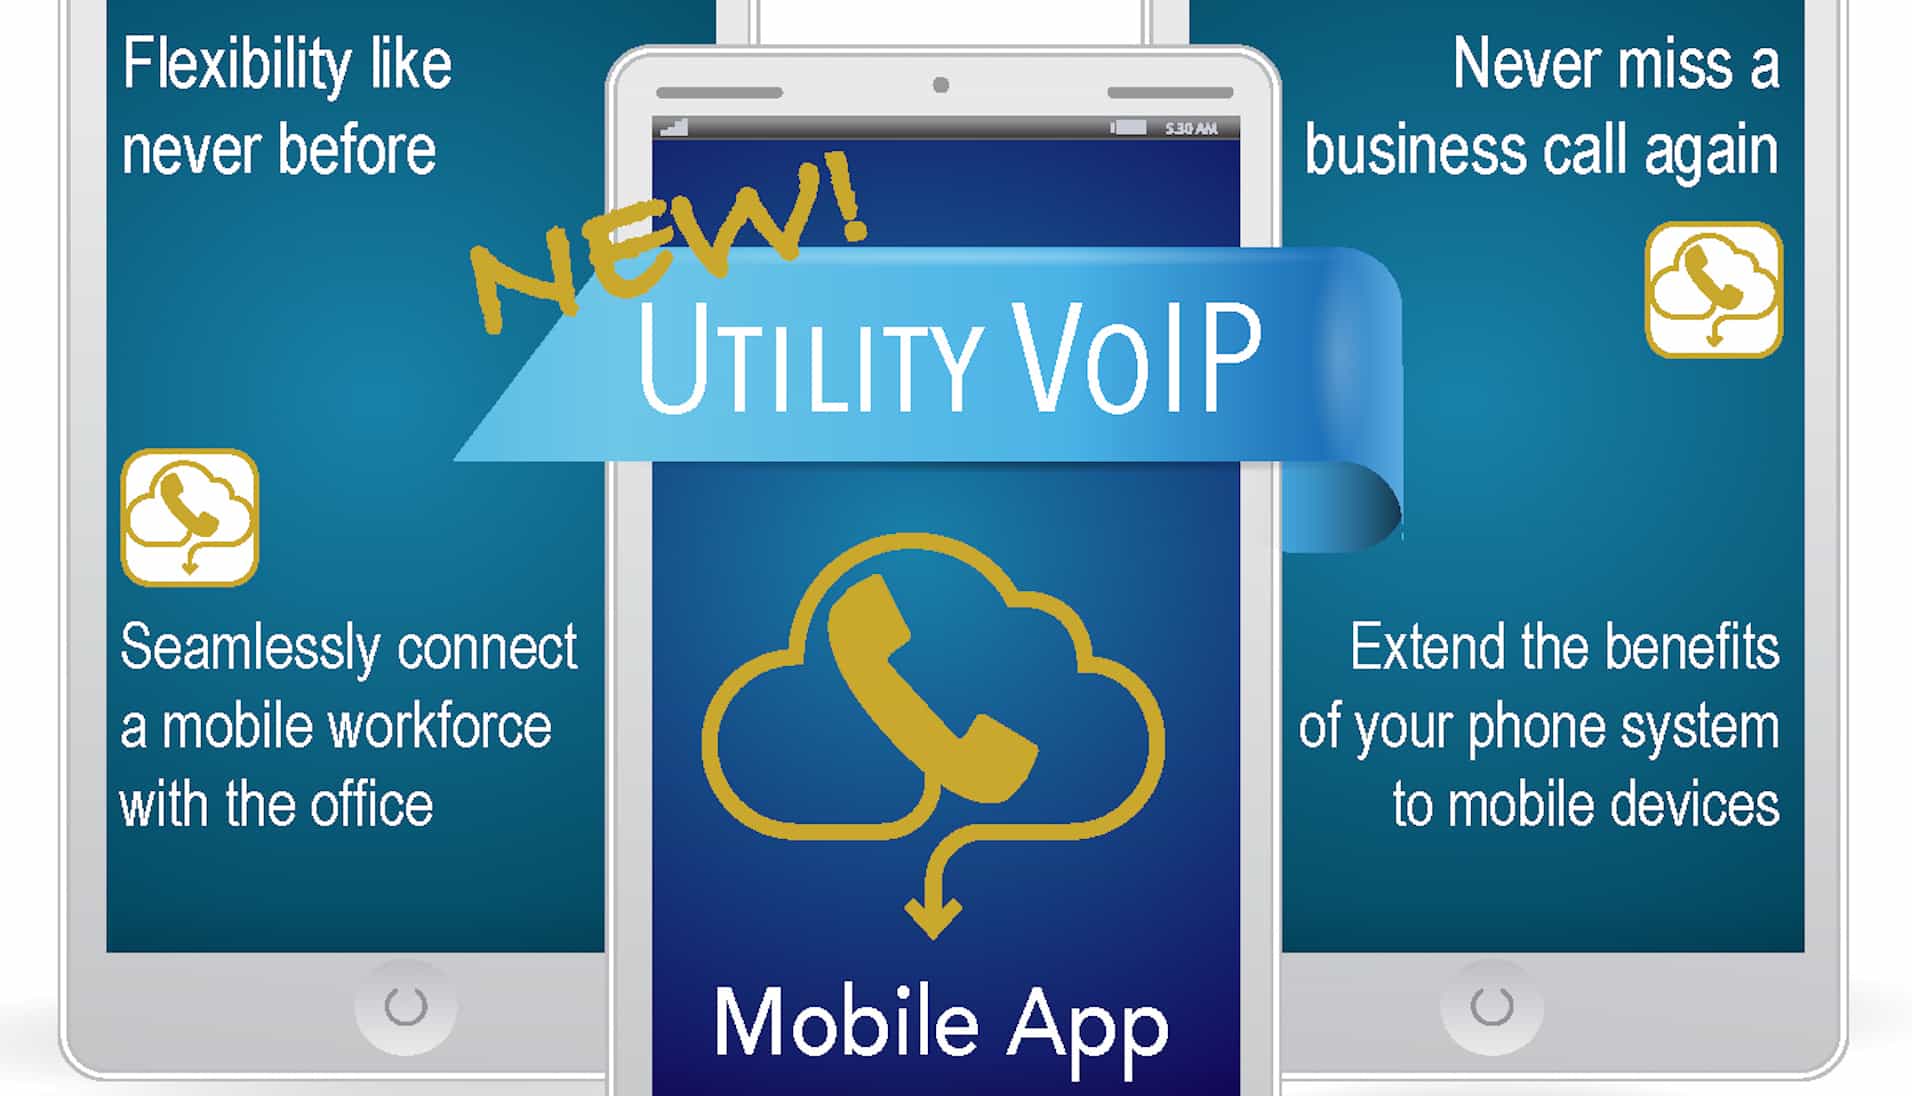 Utility VoIP mobile app